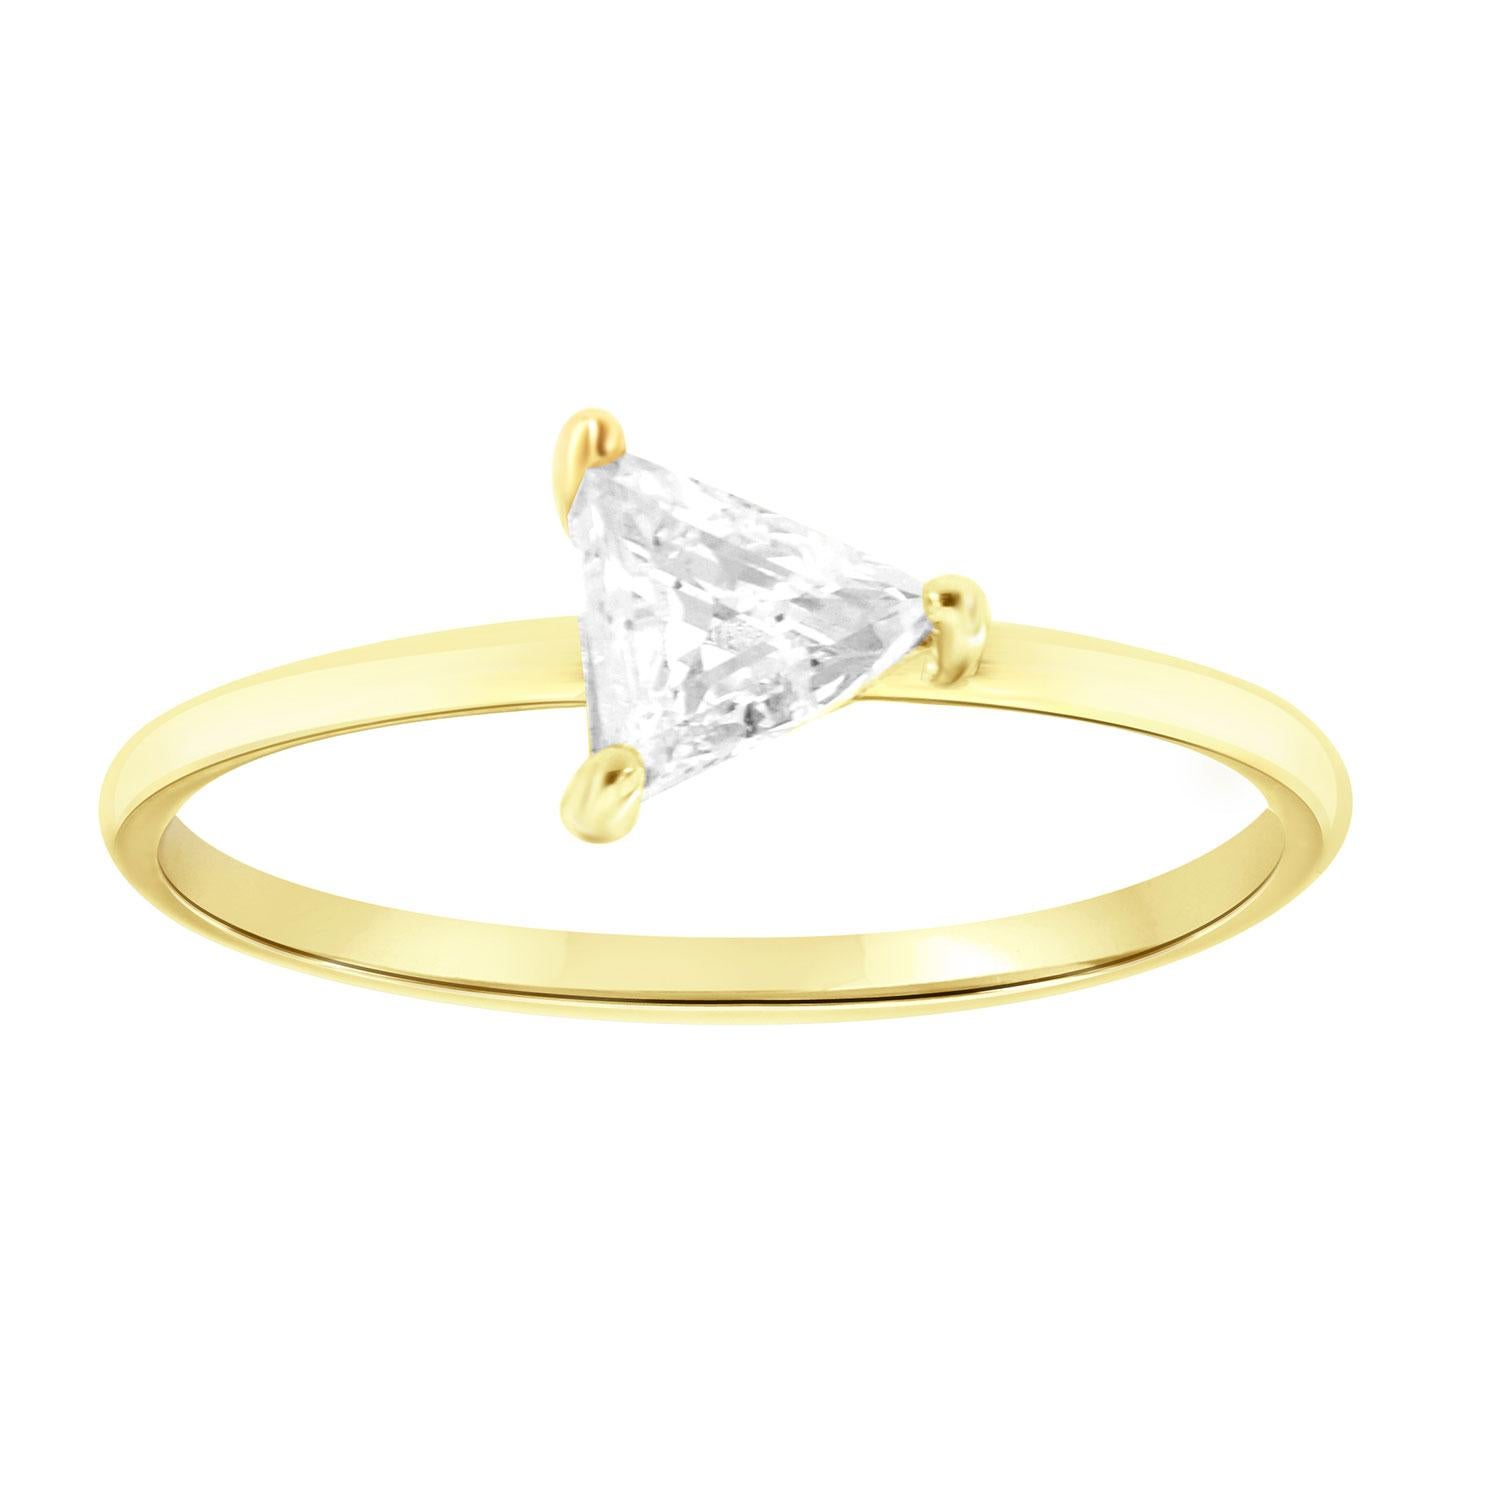 14K Yellow Gold 0.38 Carat Trillion Salt and Pepper Diamond Solitaire Ring